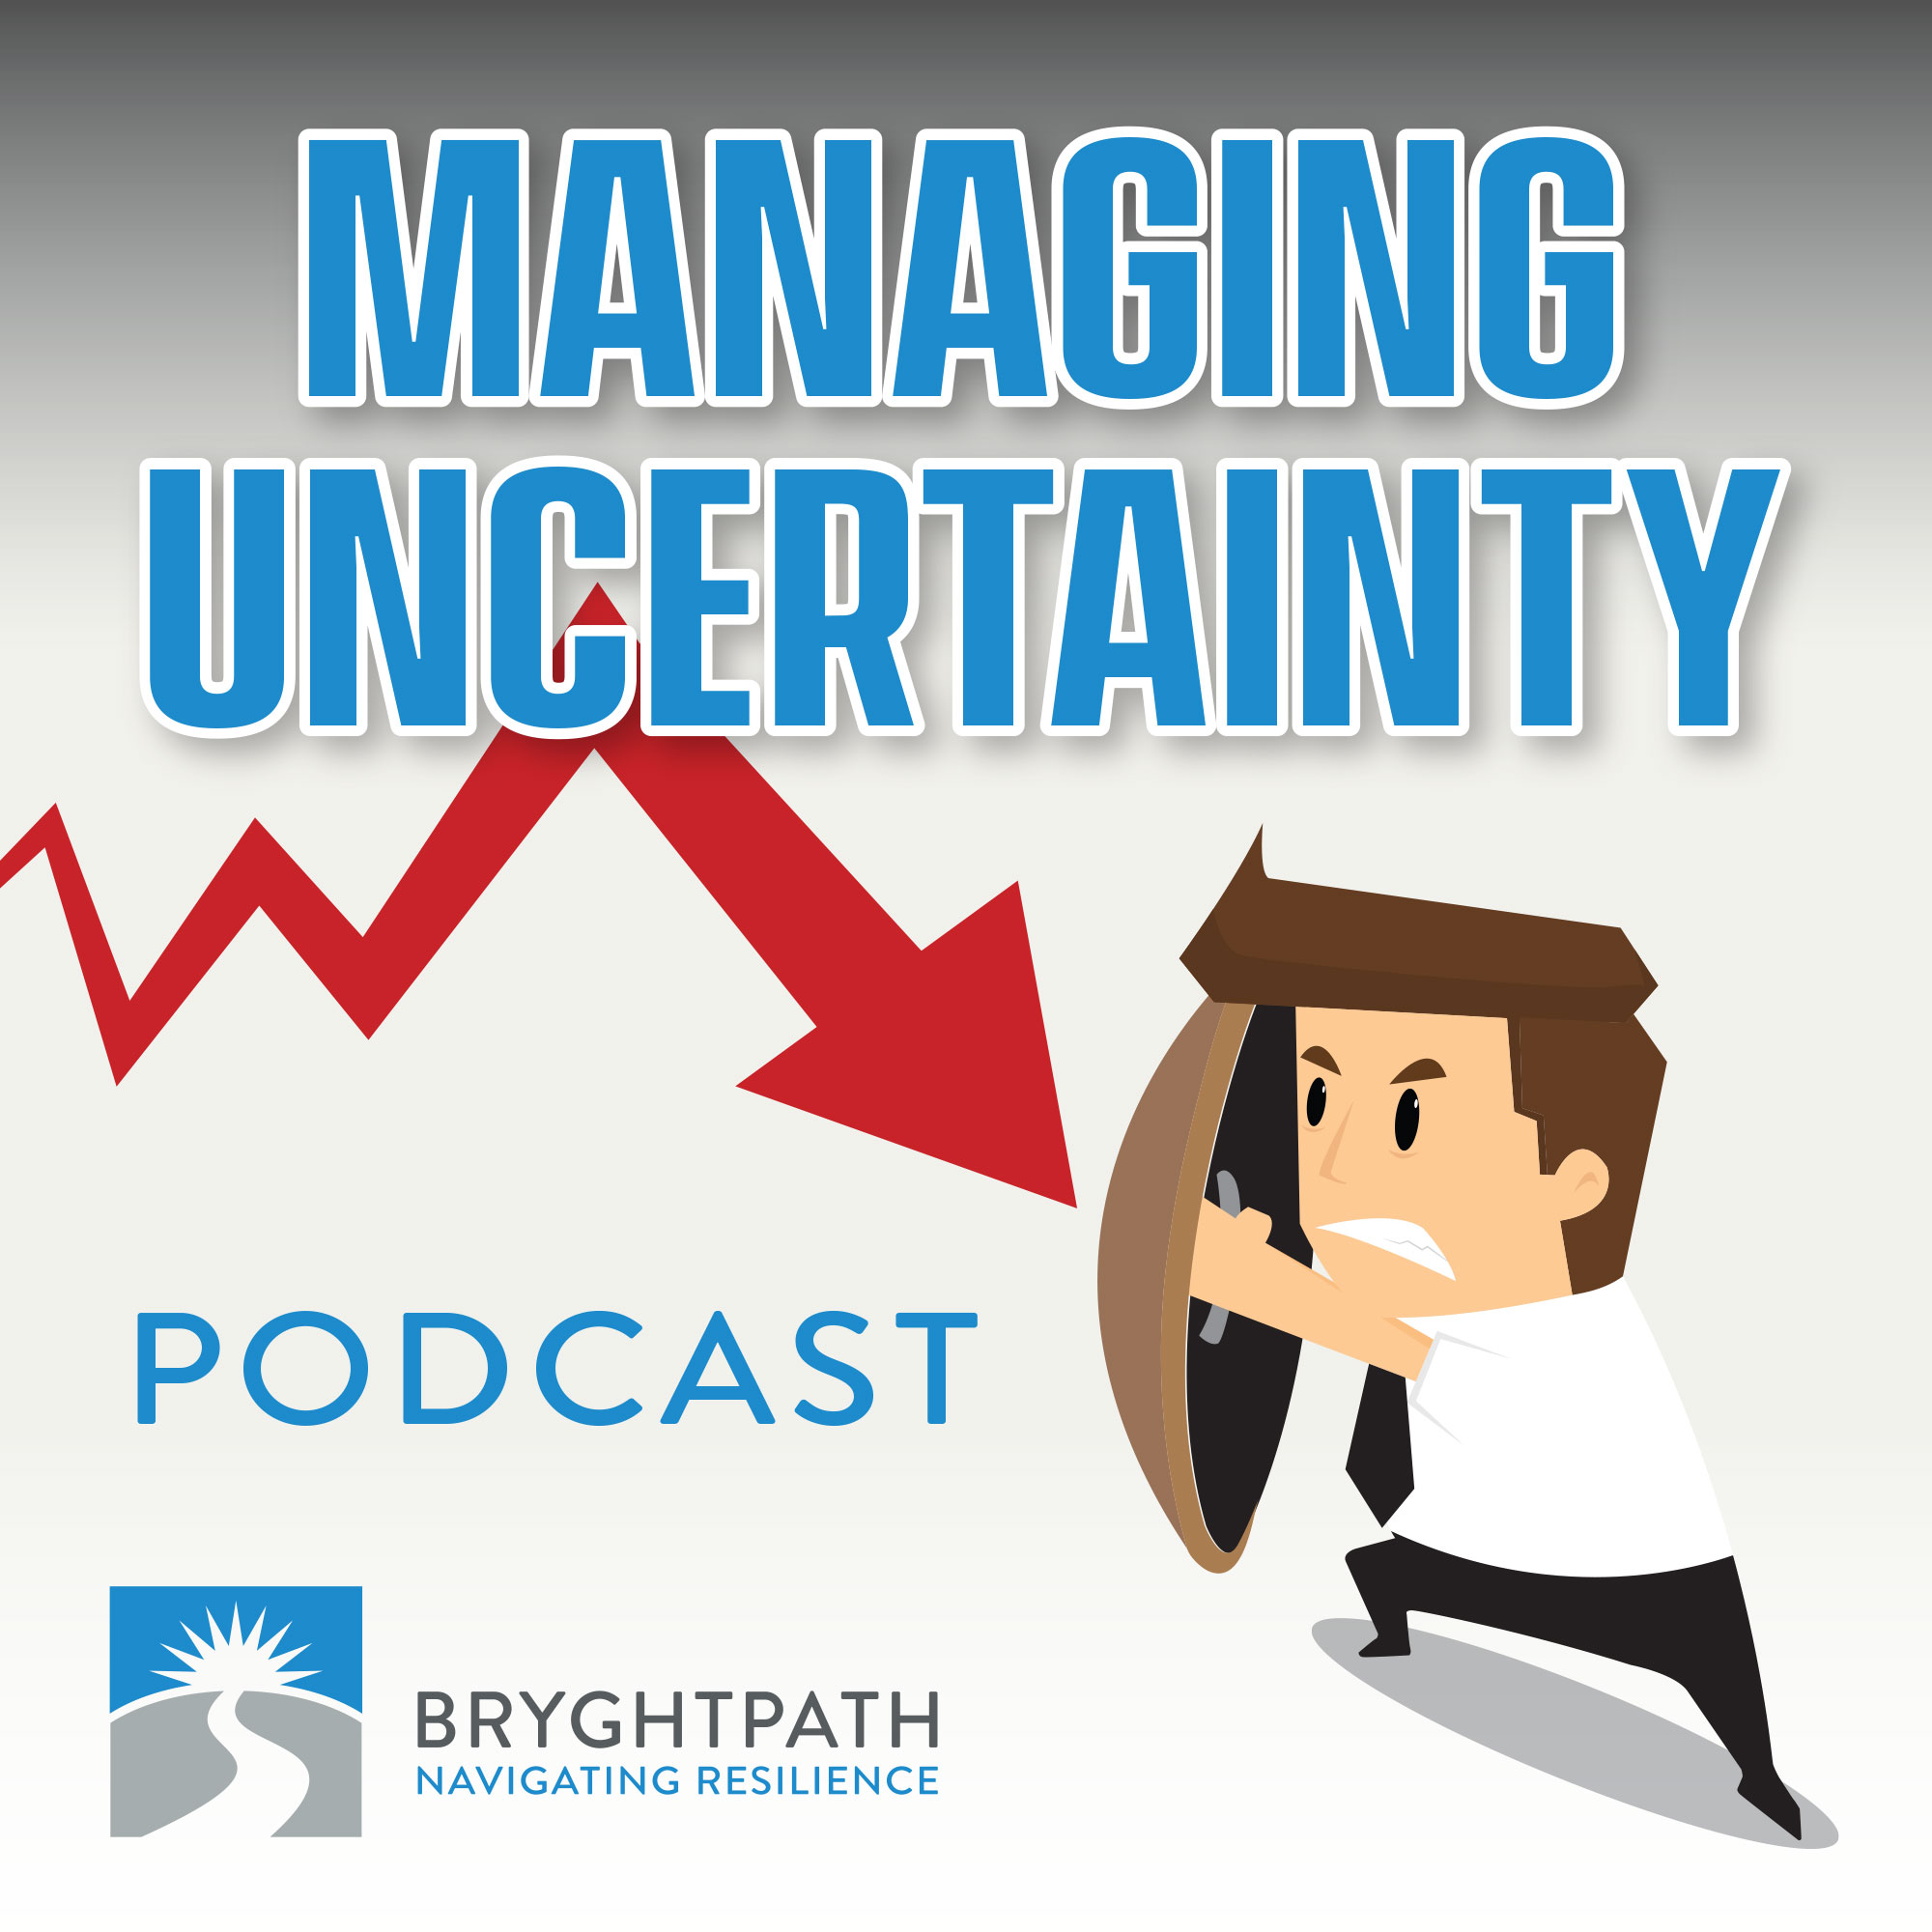 Managing Uncertainty Podcast - Episode #160: Bryghtpath’s Origin Story